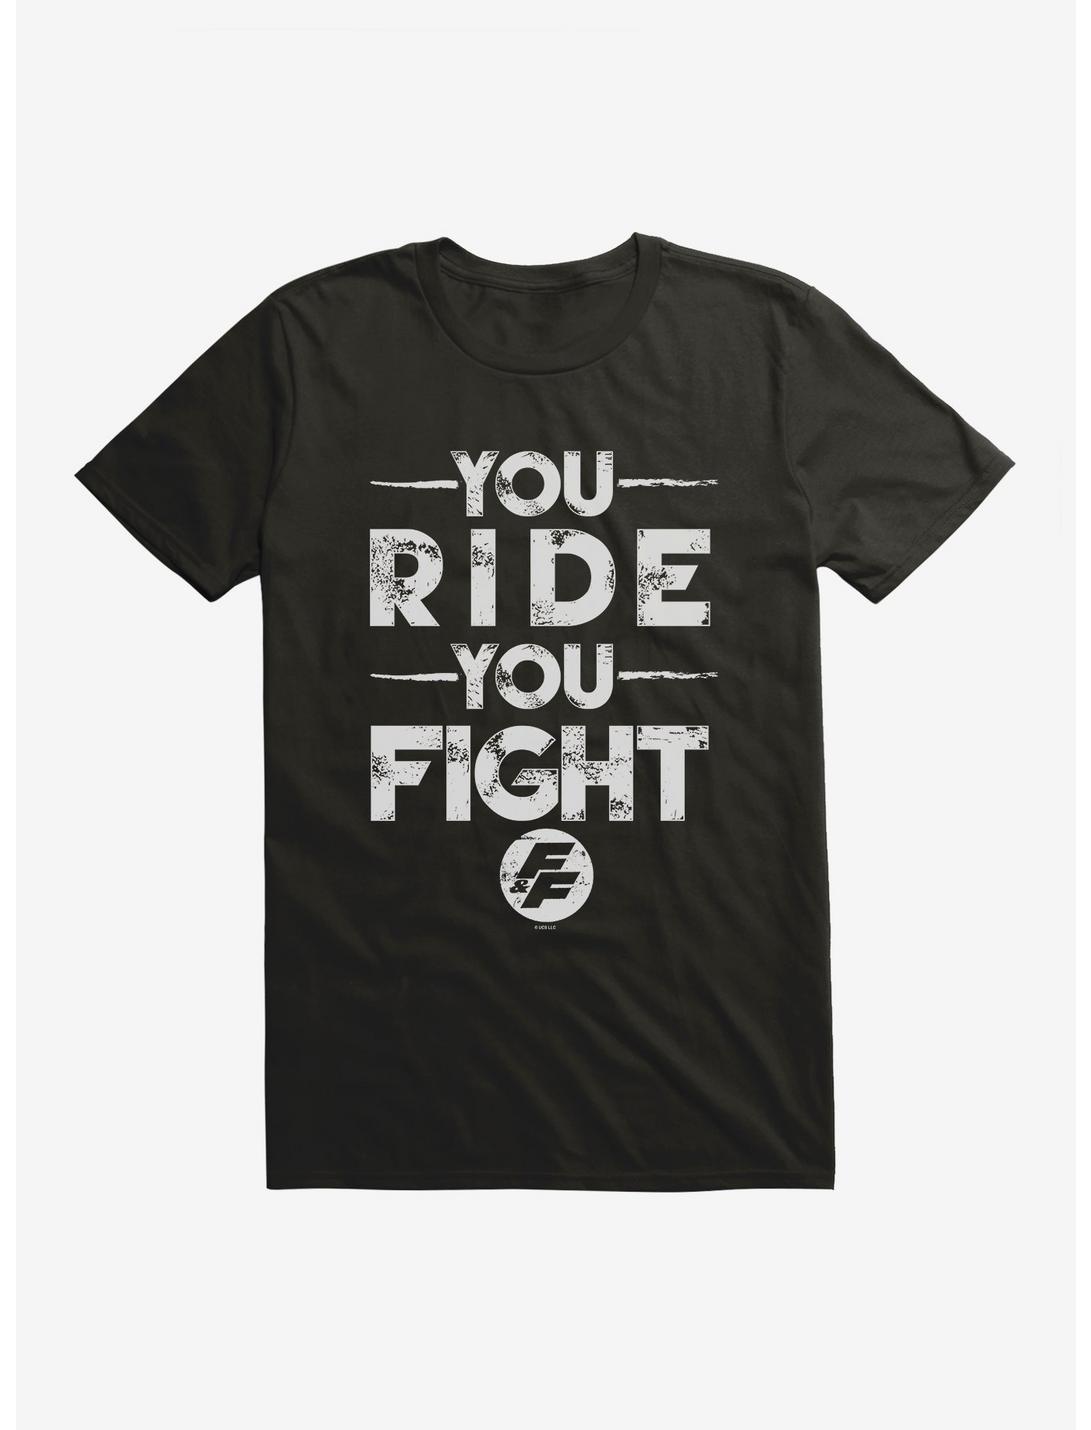 Fast & Furious You Ride You Fight T-Shirt, , hi-res